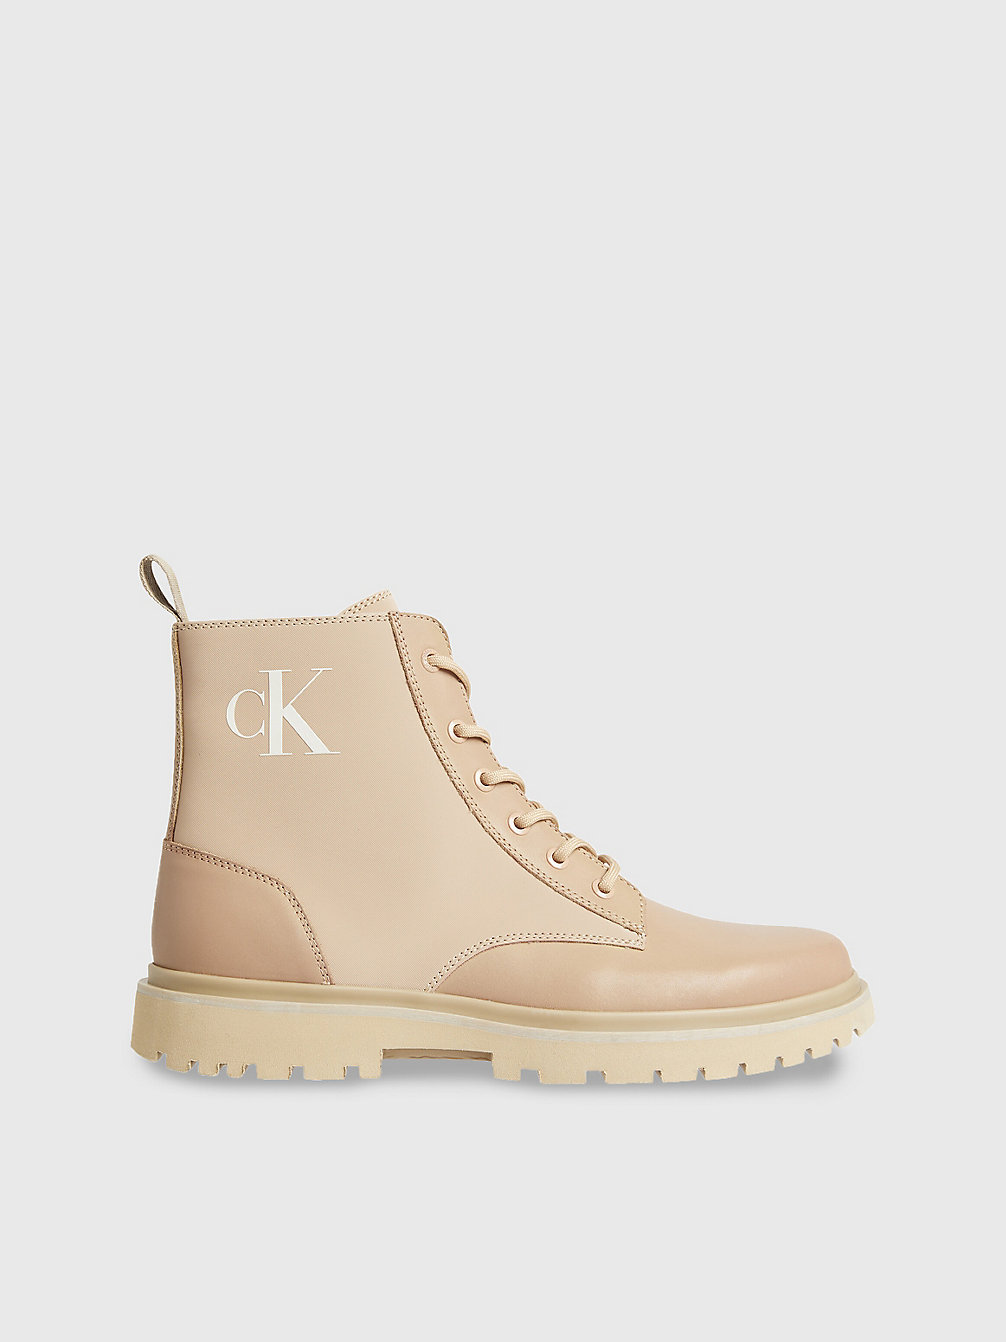 CANDIED GINGER Leather Lug Sole Boots undefined men Calvin Klein